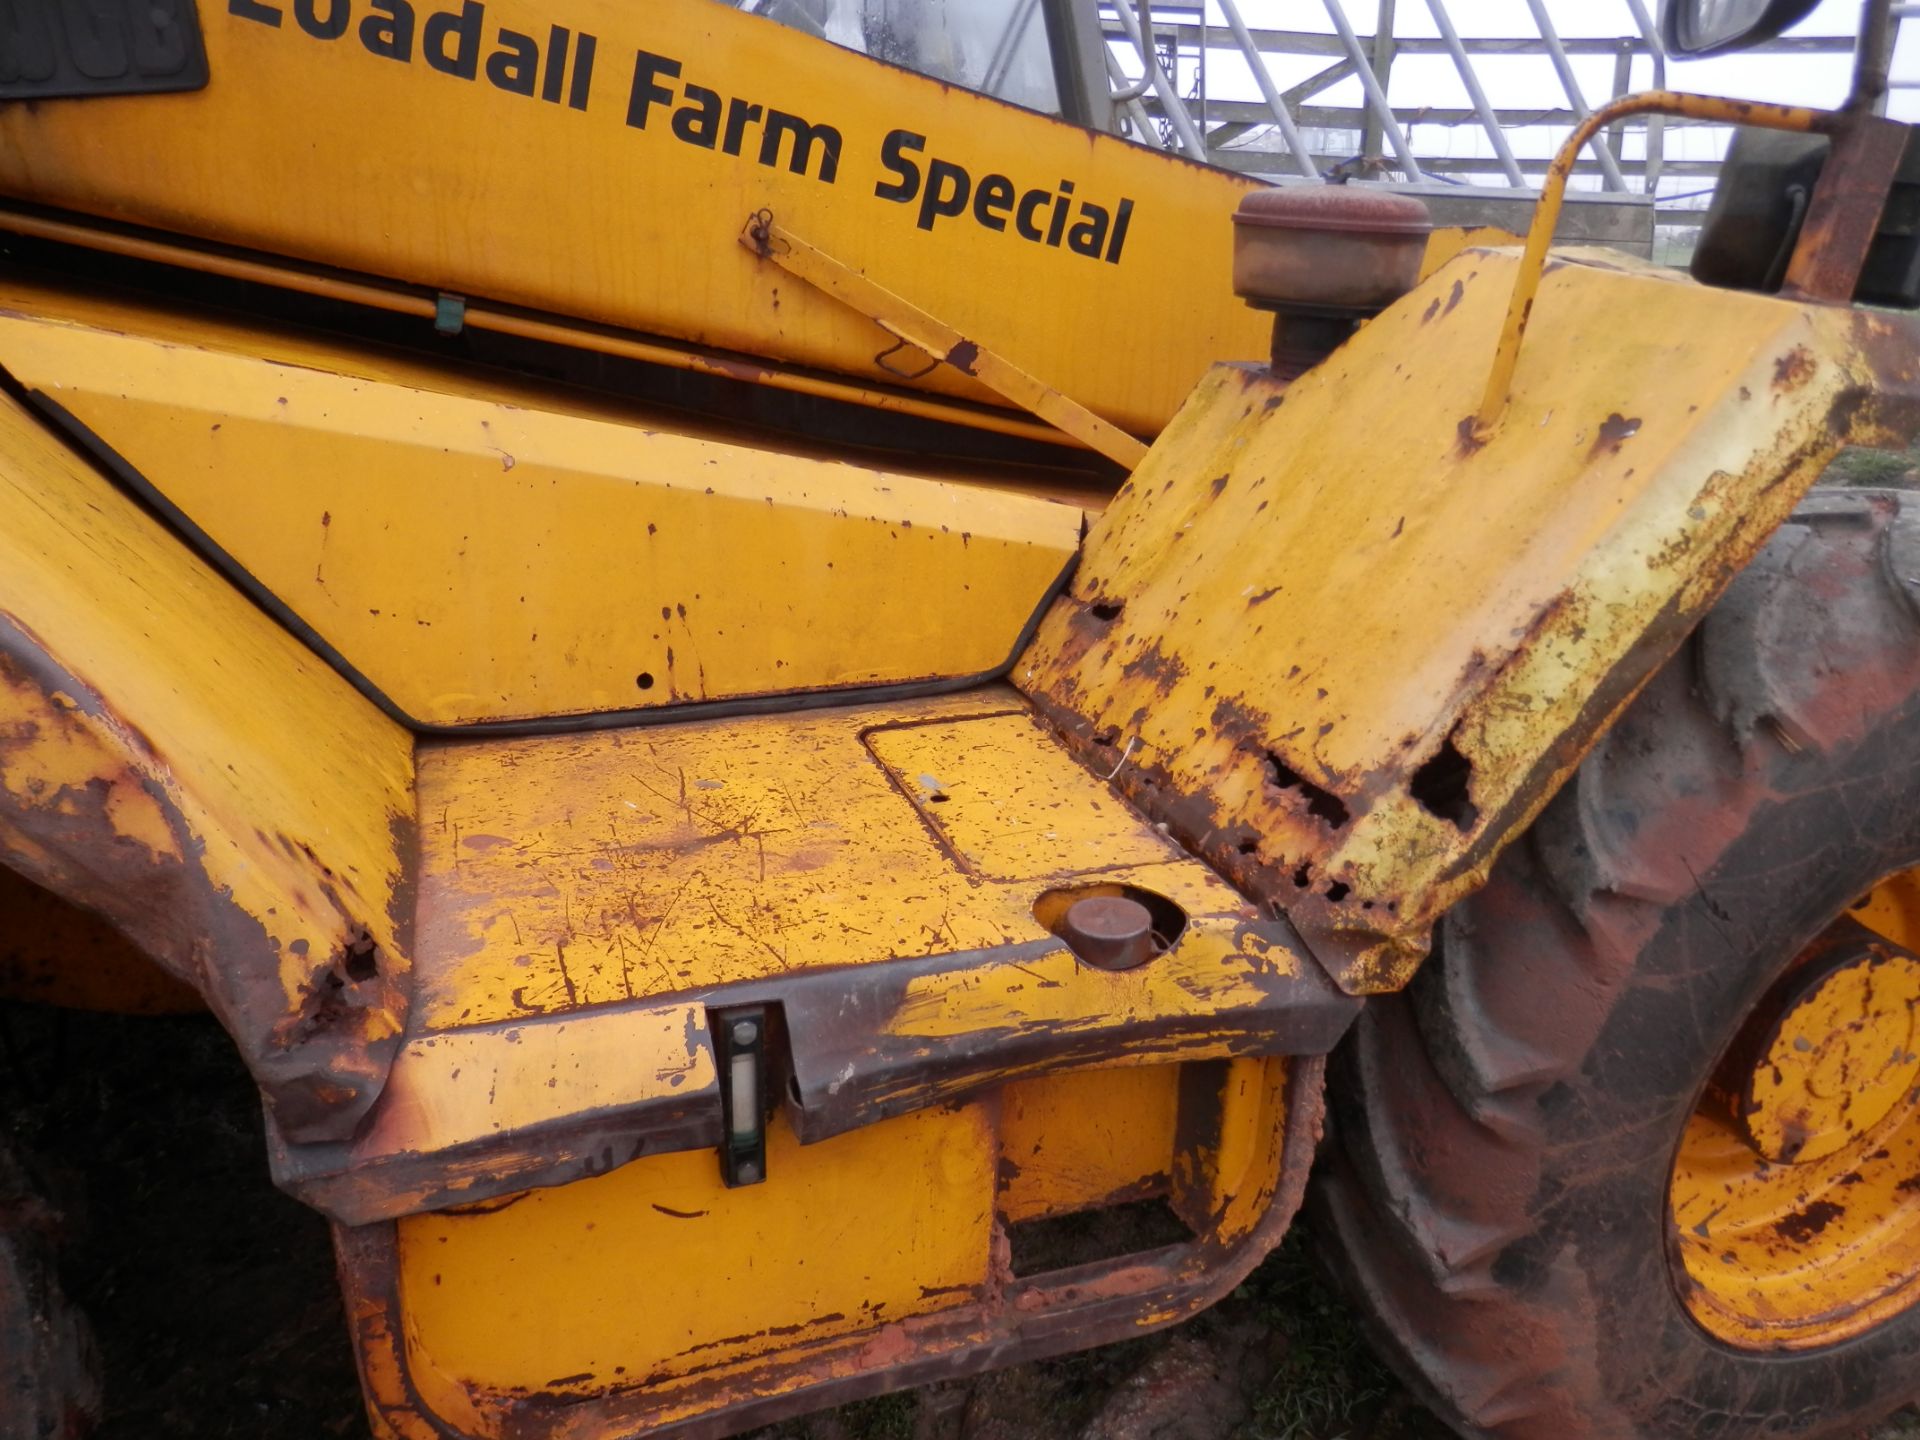 1994 JCB 525-58 LOAD ALL FARM SPECIAL TELE HANDLER. WORKING UNIT - Image 9 of 9